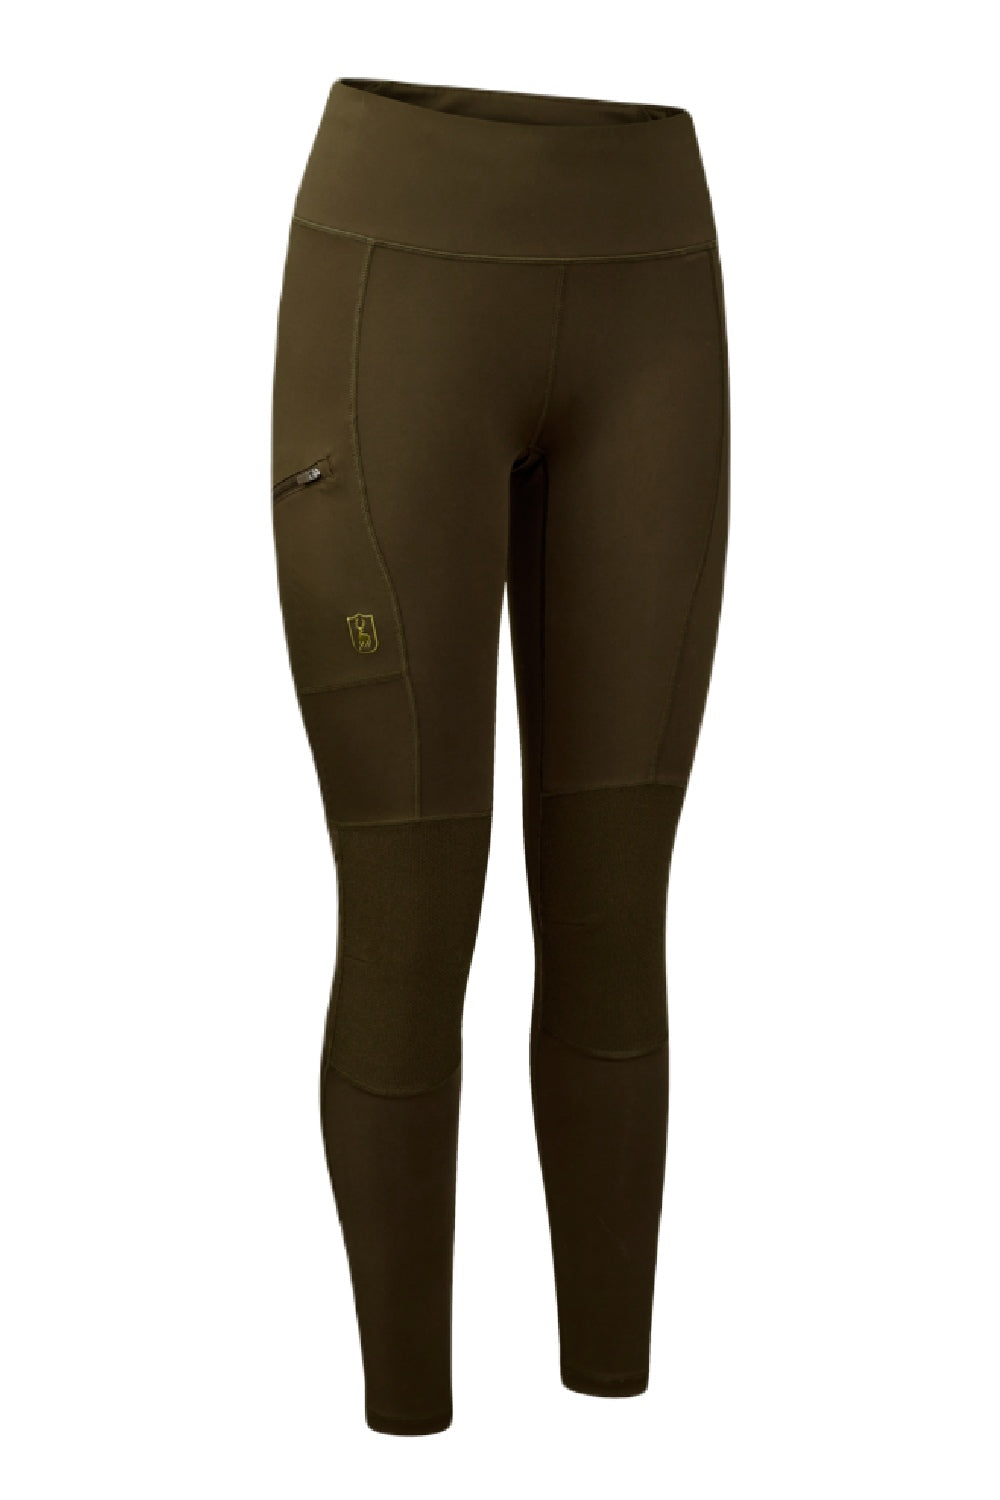 Womens Leggings and Tights - Perfect for Walking or Riding